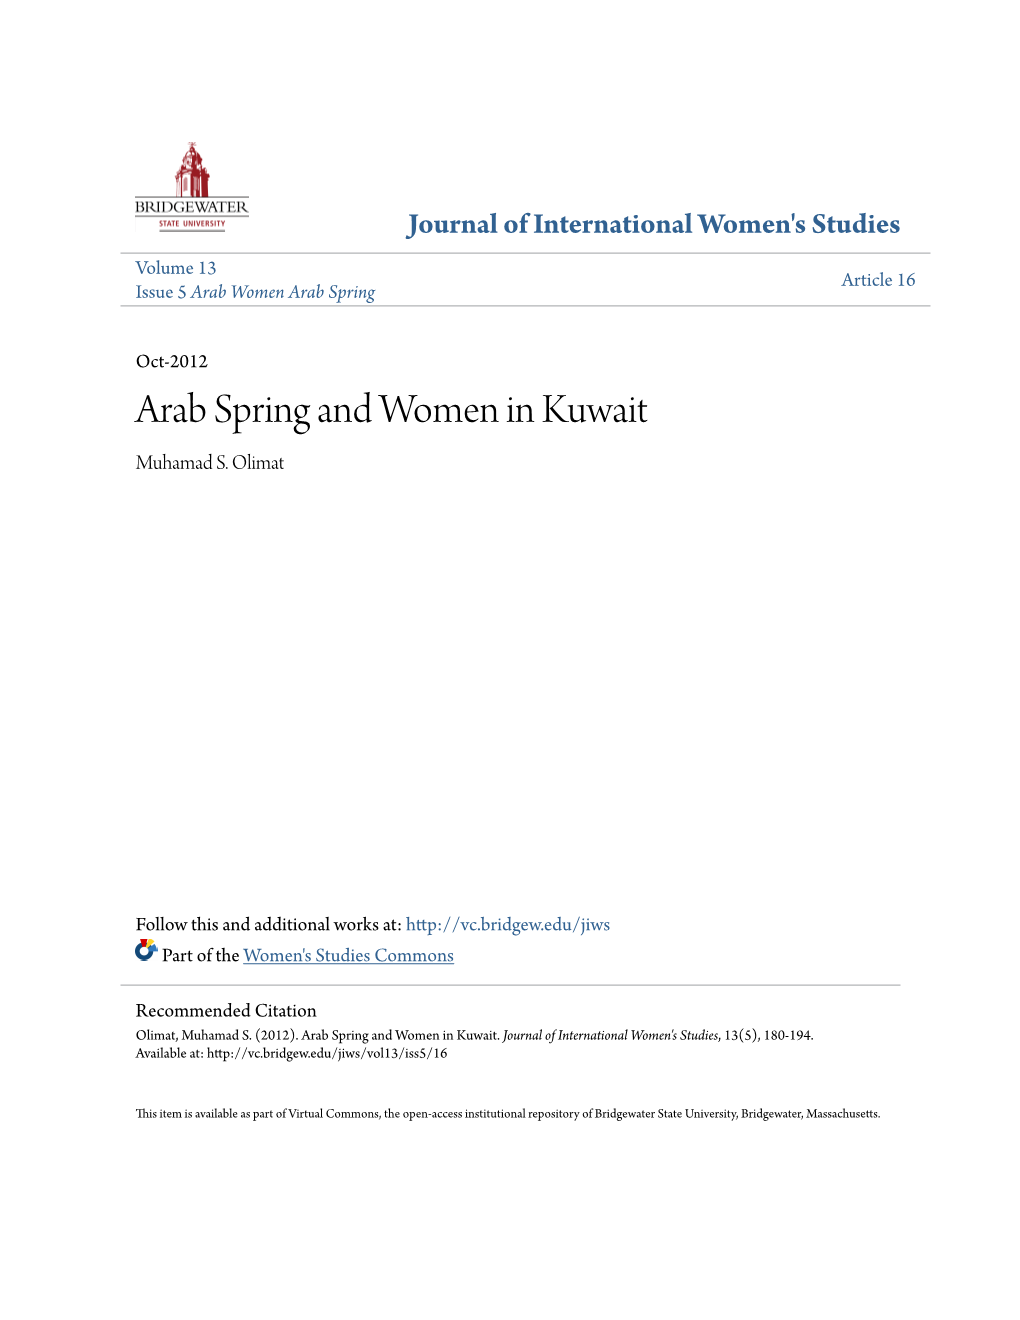 Arab Spring and Women in Kuwait Muhamad S